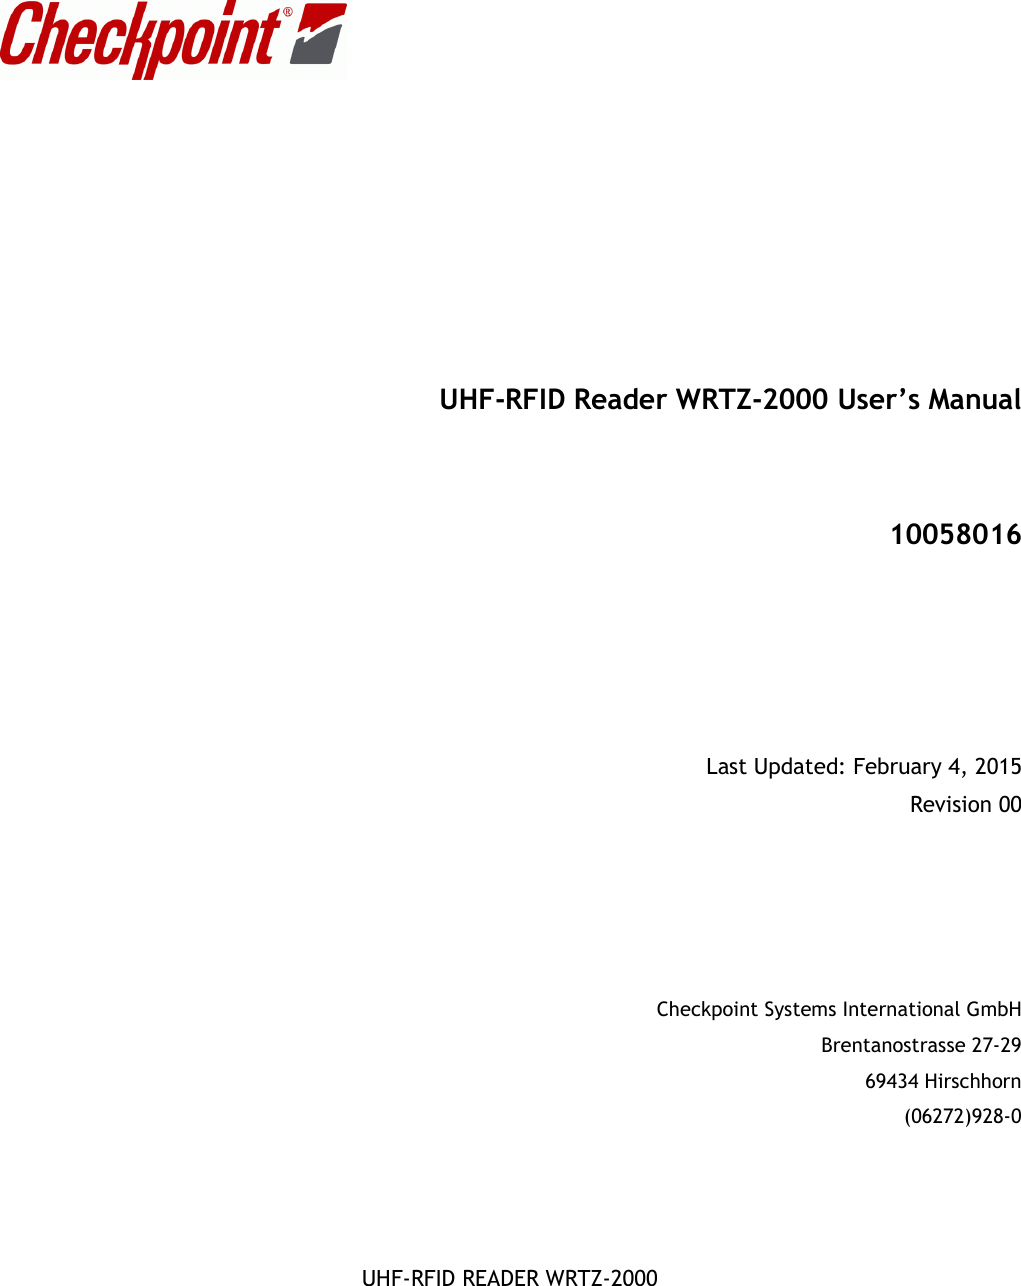    UHF-RFID READER WRTZ-2000                           UHF-RFID Reader WRTZ-2000 User’s Manual    10058016      Last Updated: February 4, 2015 Revision 00       Checkpoint Systems International GmbH Brentanostrasse 27-29 69434 Hirschhorn (06272)928-0 